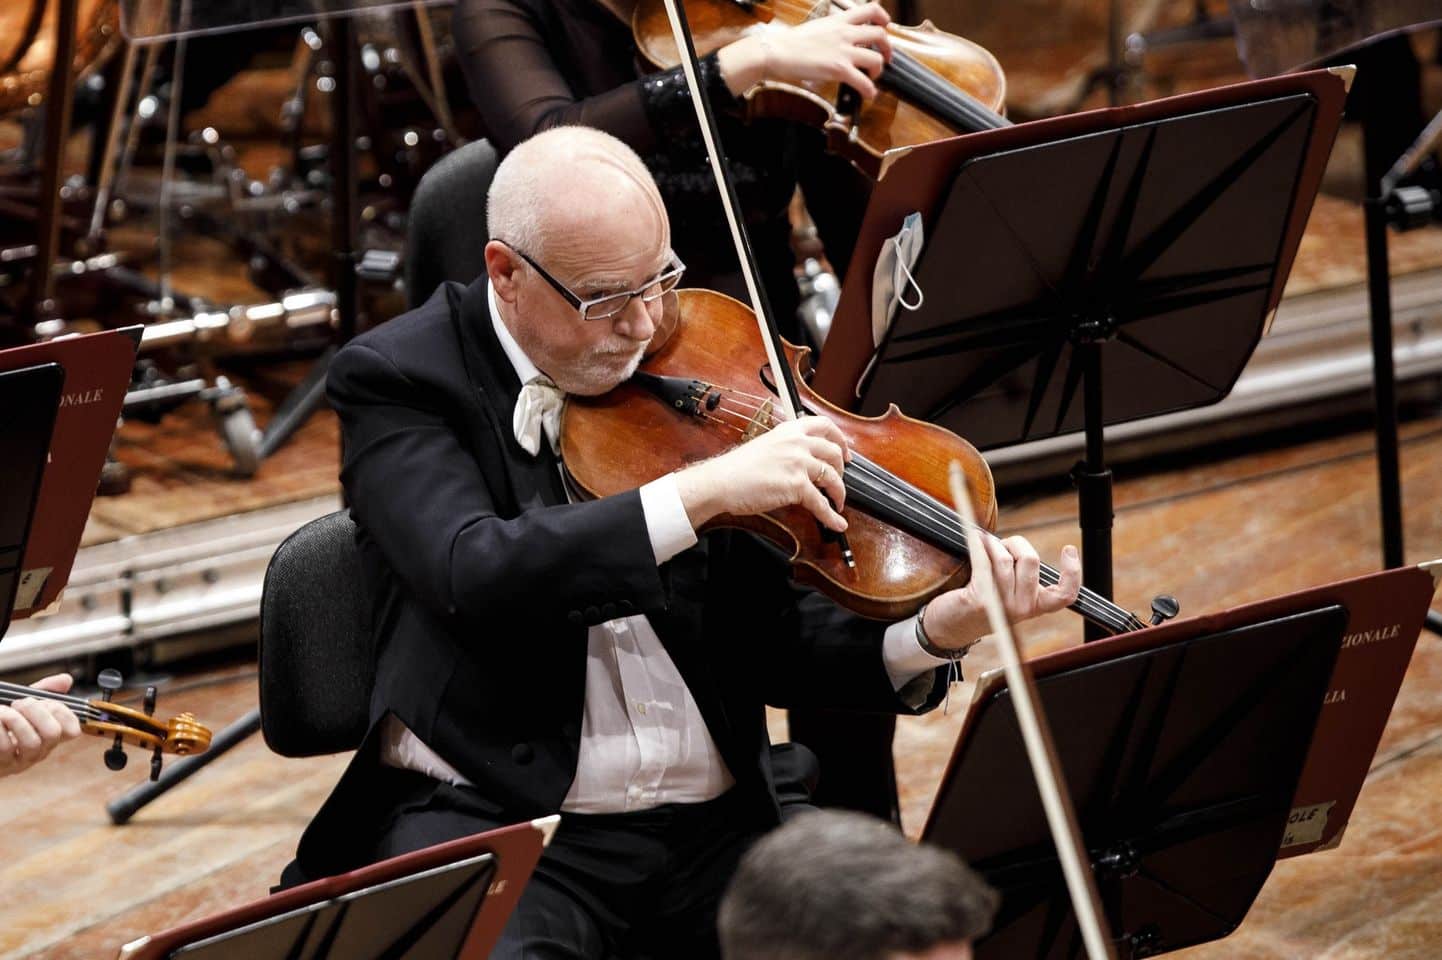 Italy’s musicians mourn revered violist